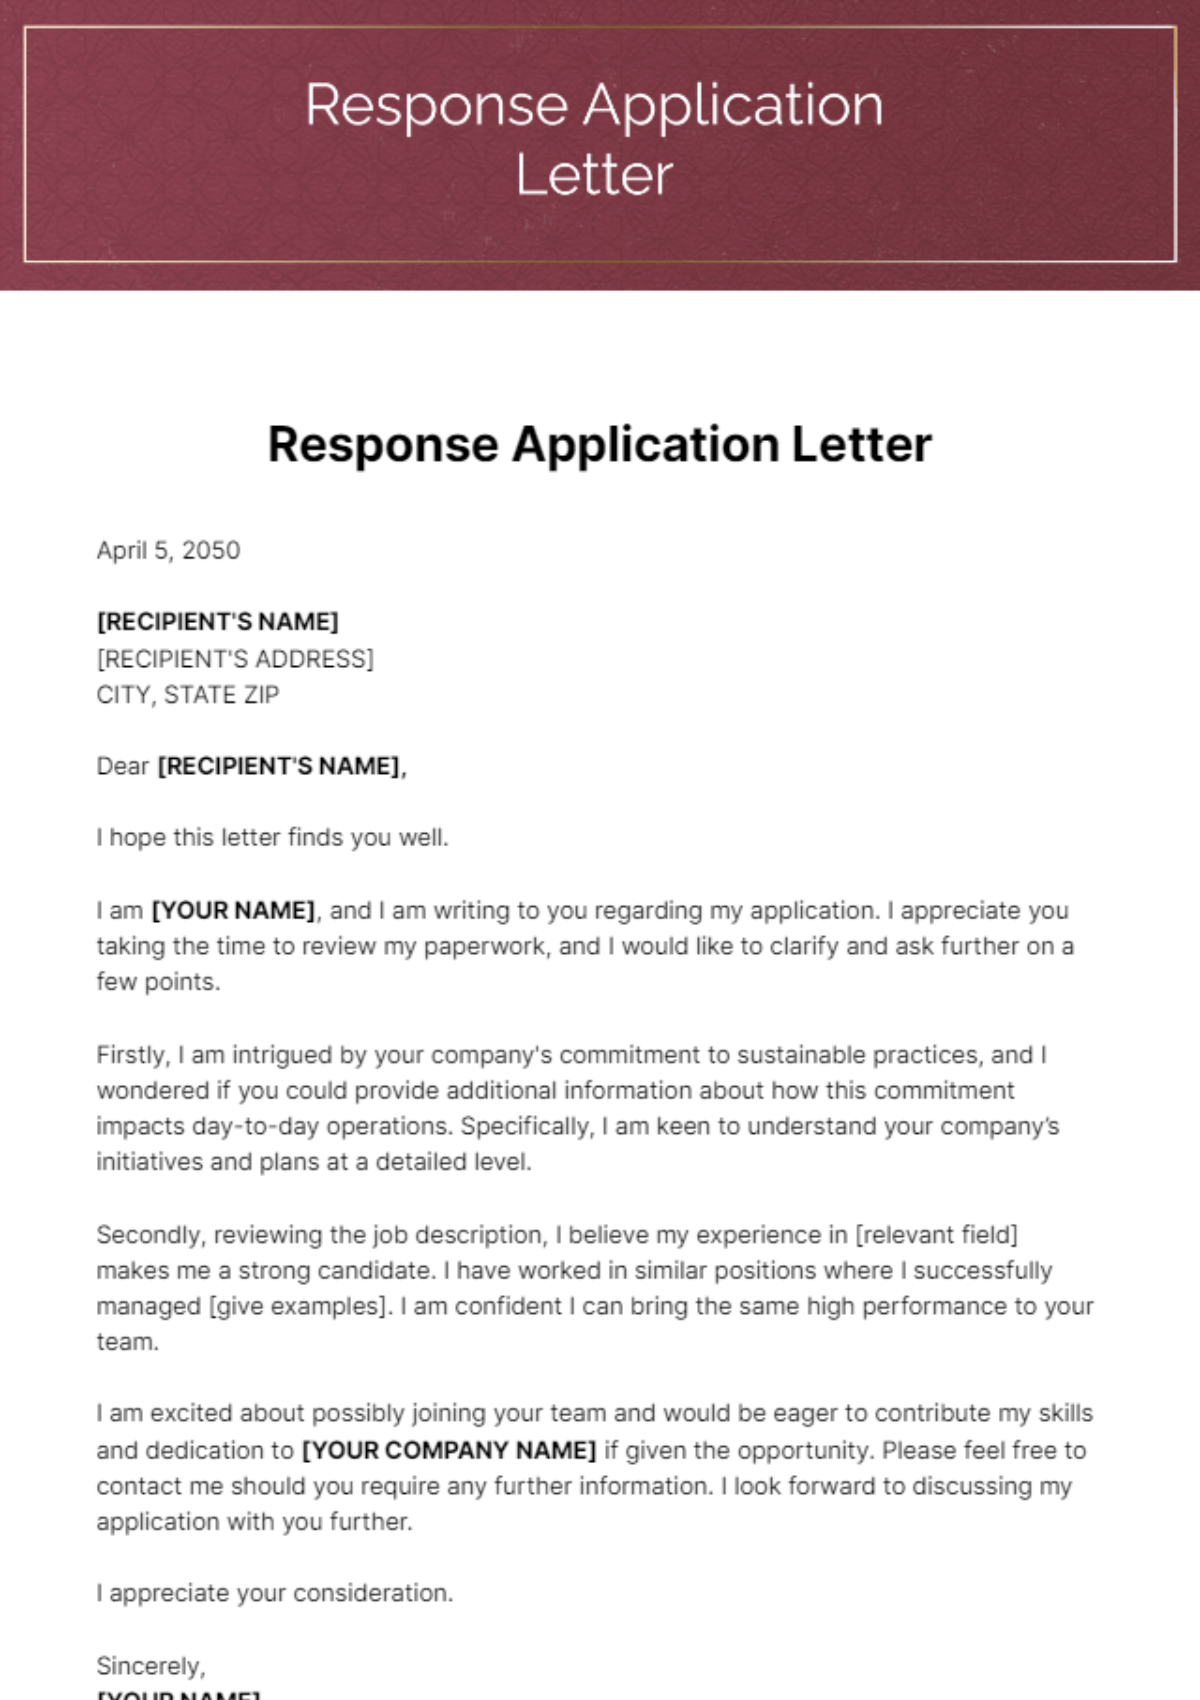 Free Response Application Letter Template